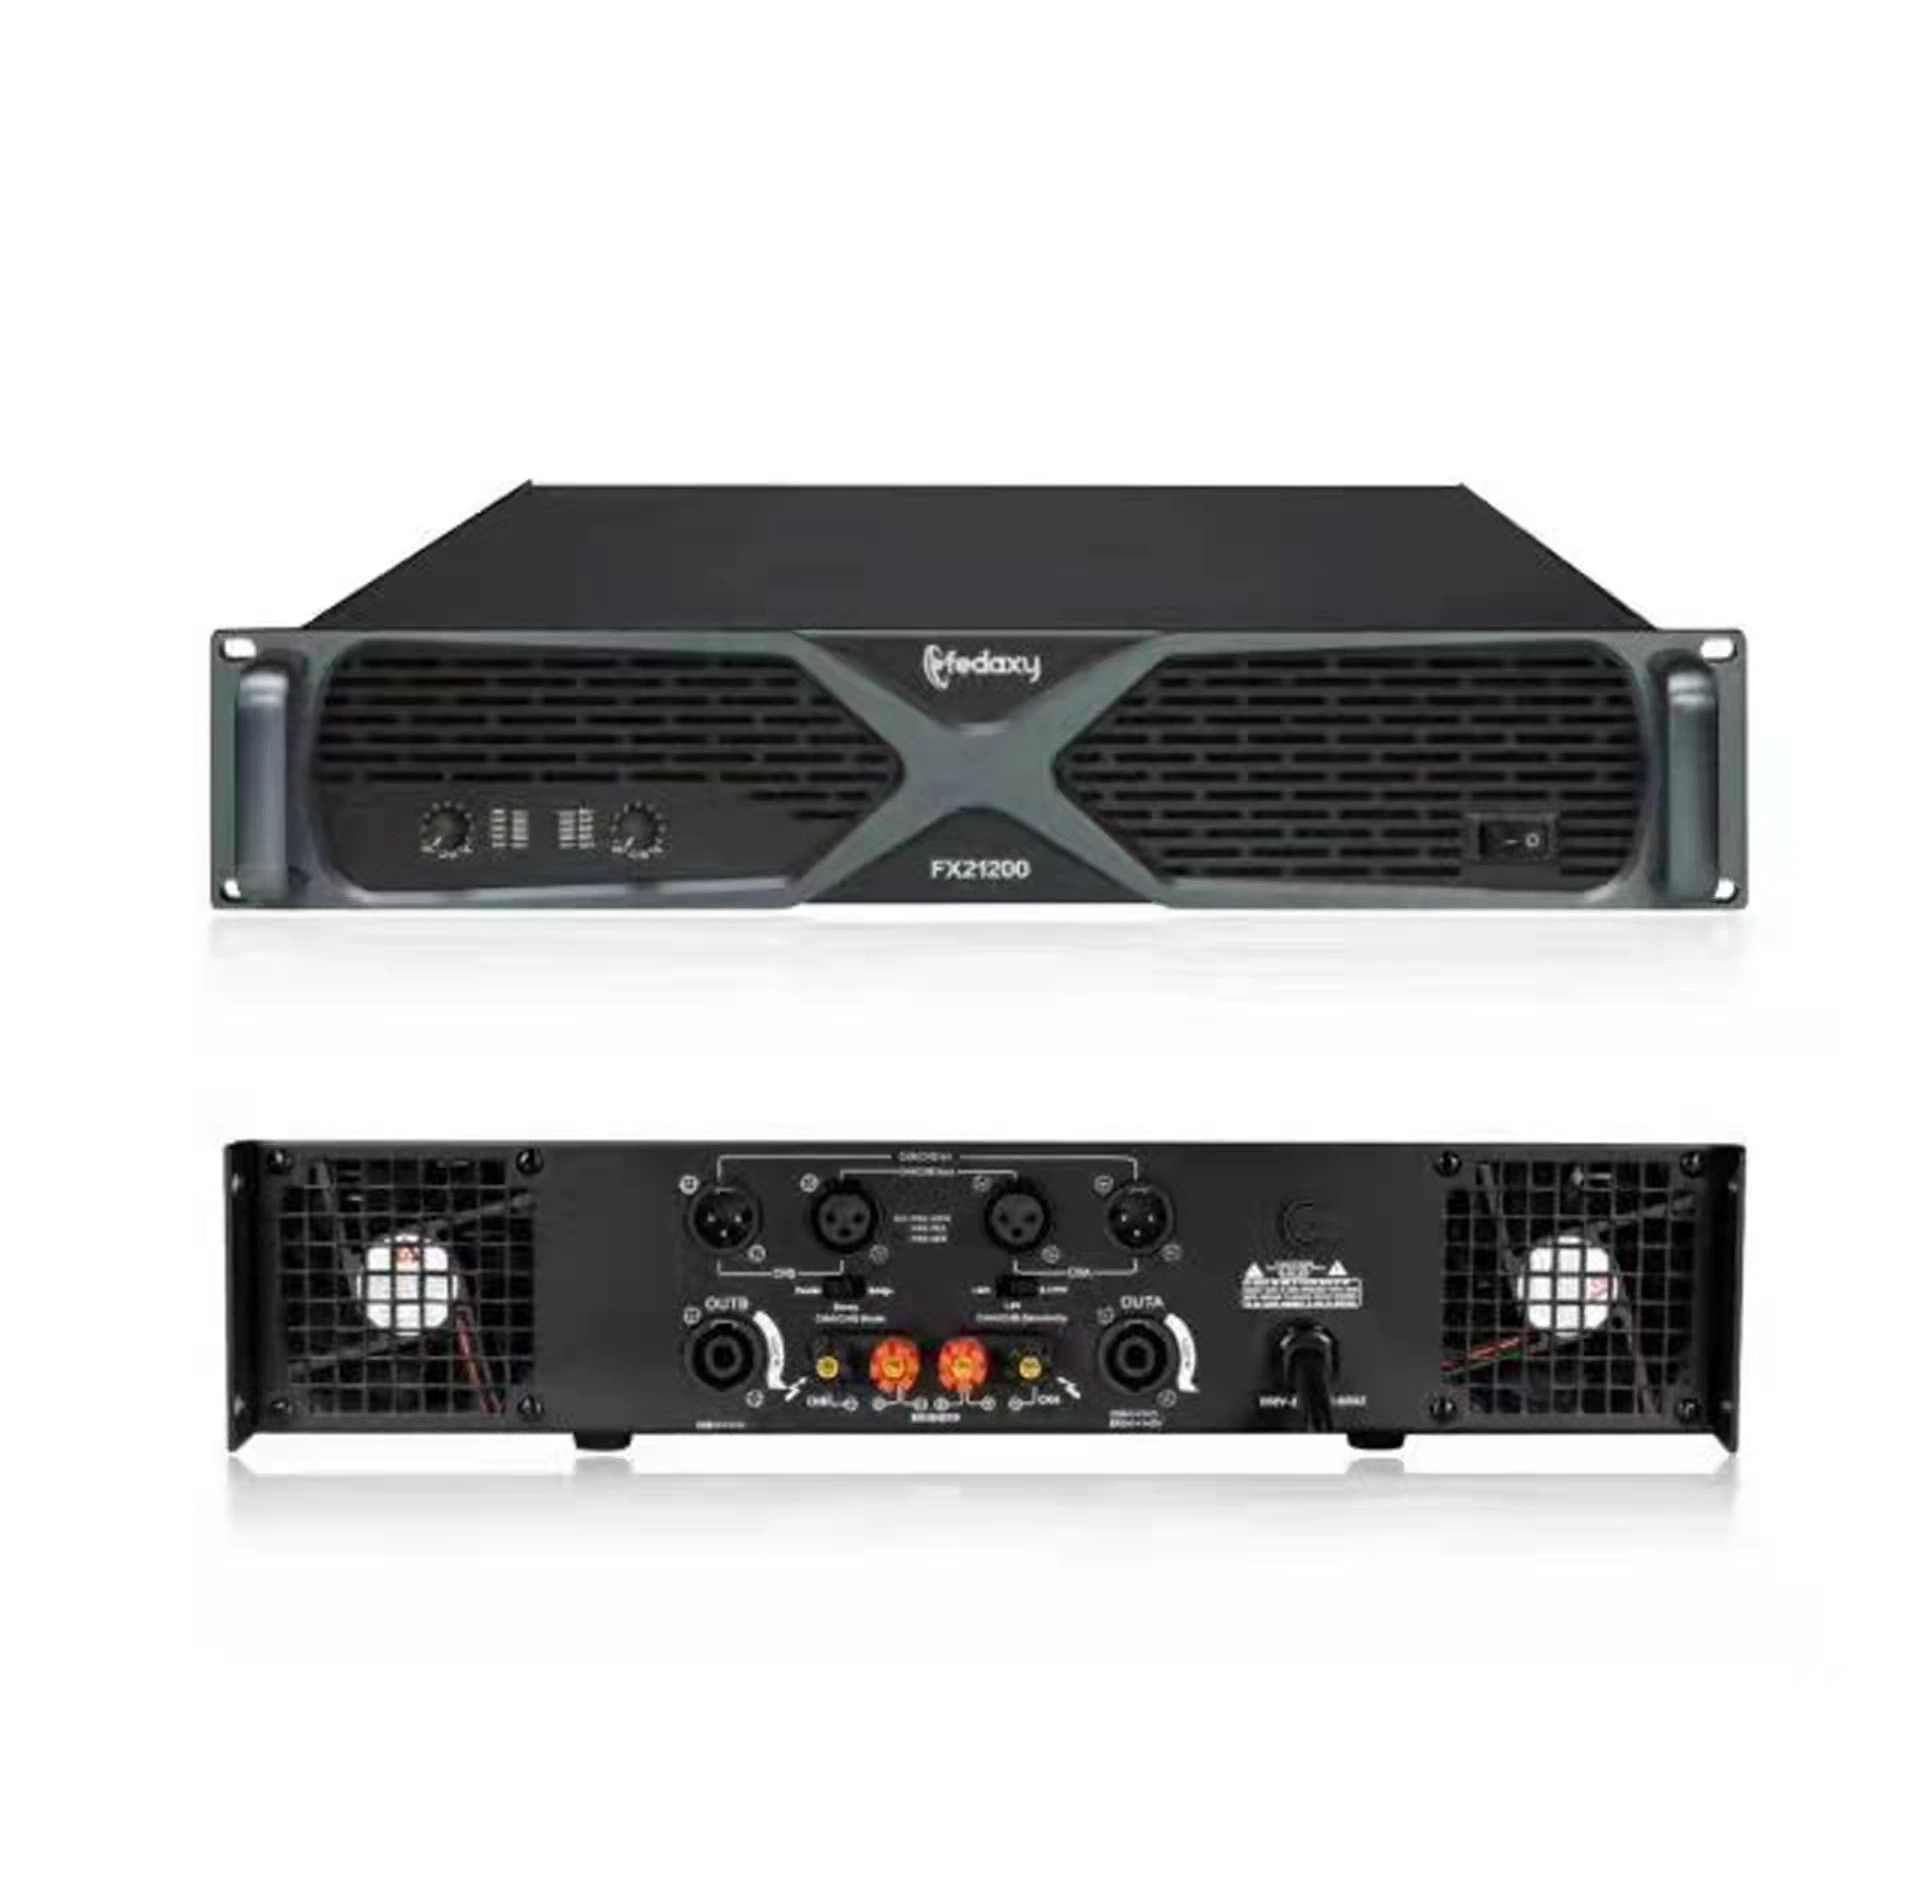 Dragonstage China Big Watt Popular Stable Live Power Amplifier Class H 2 Channel 600W